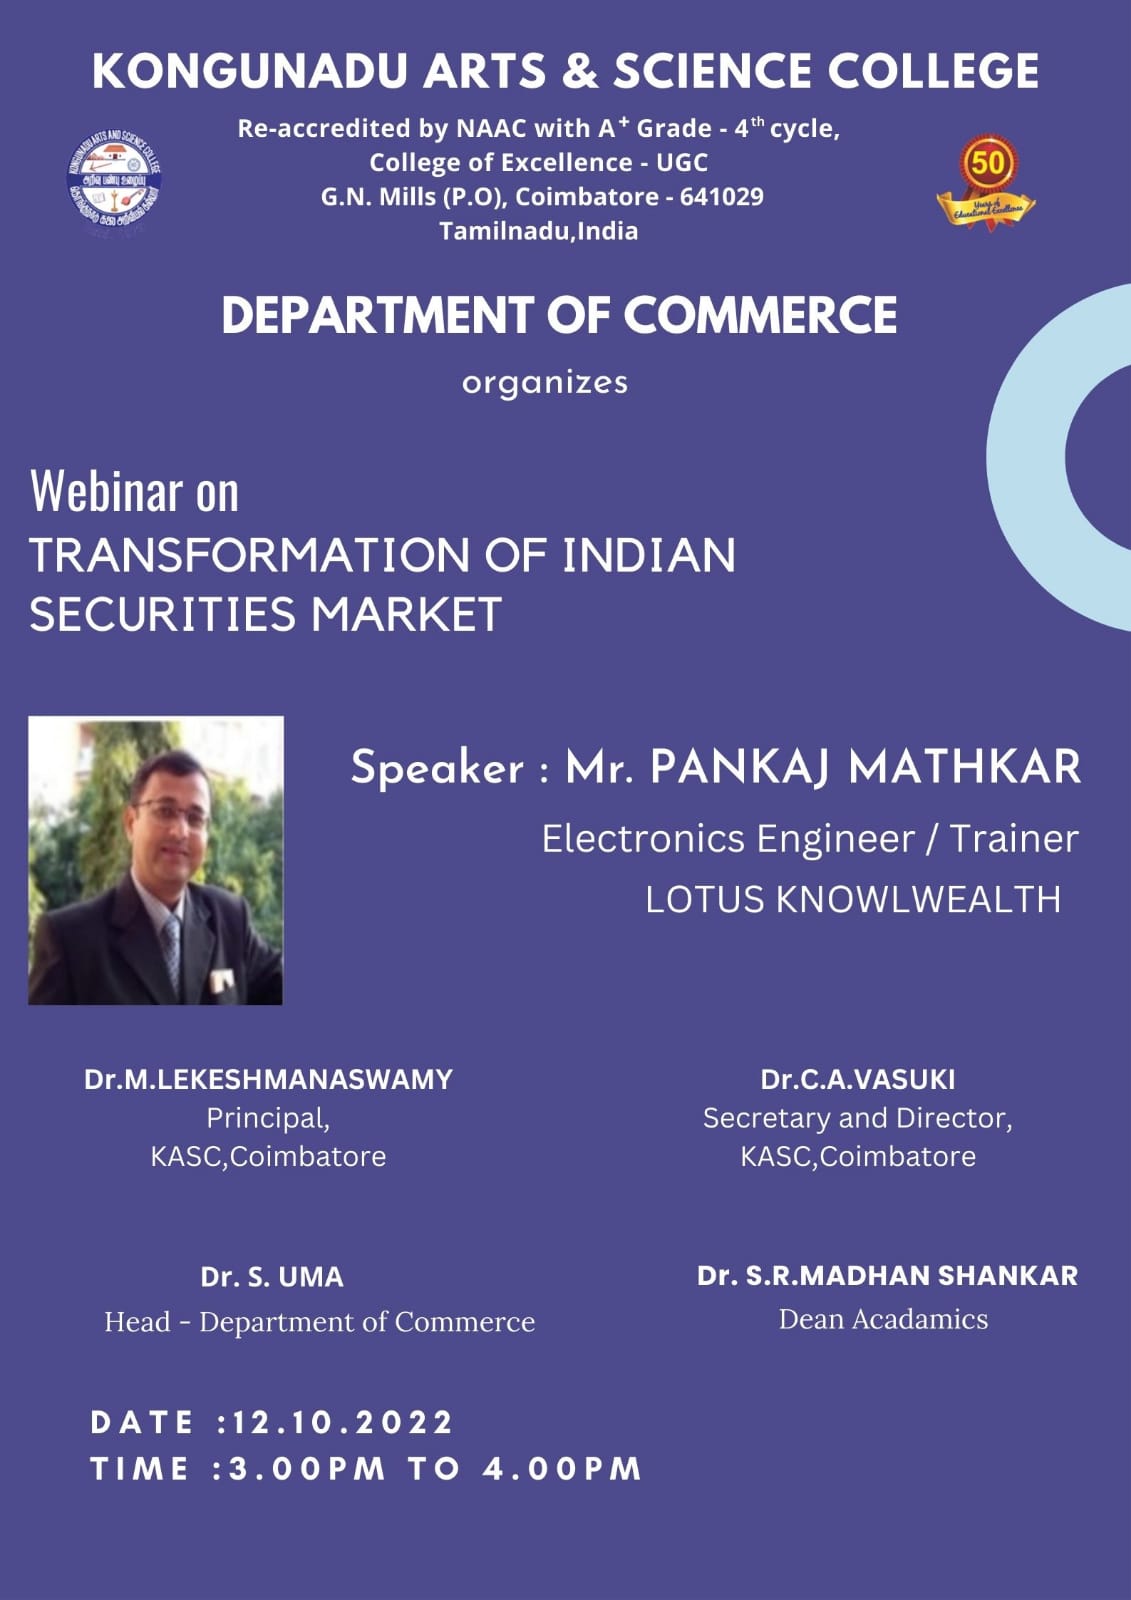 WEBINAR ON TRANSFORMATION OF INDIAN SECURITY MARKET  DATE:12.10.2022   TIME 3.00 P.M. TO 4.00 P.M